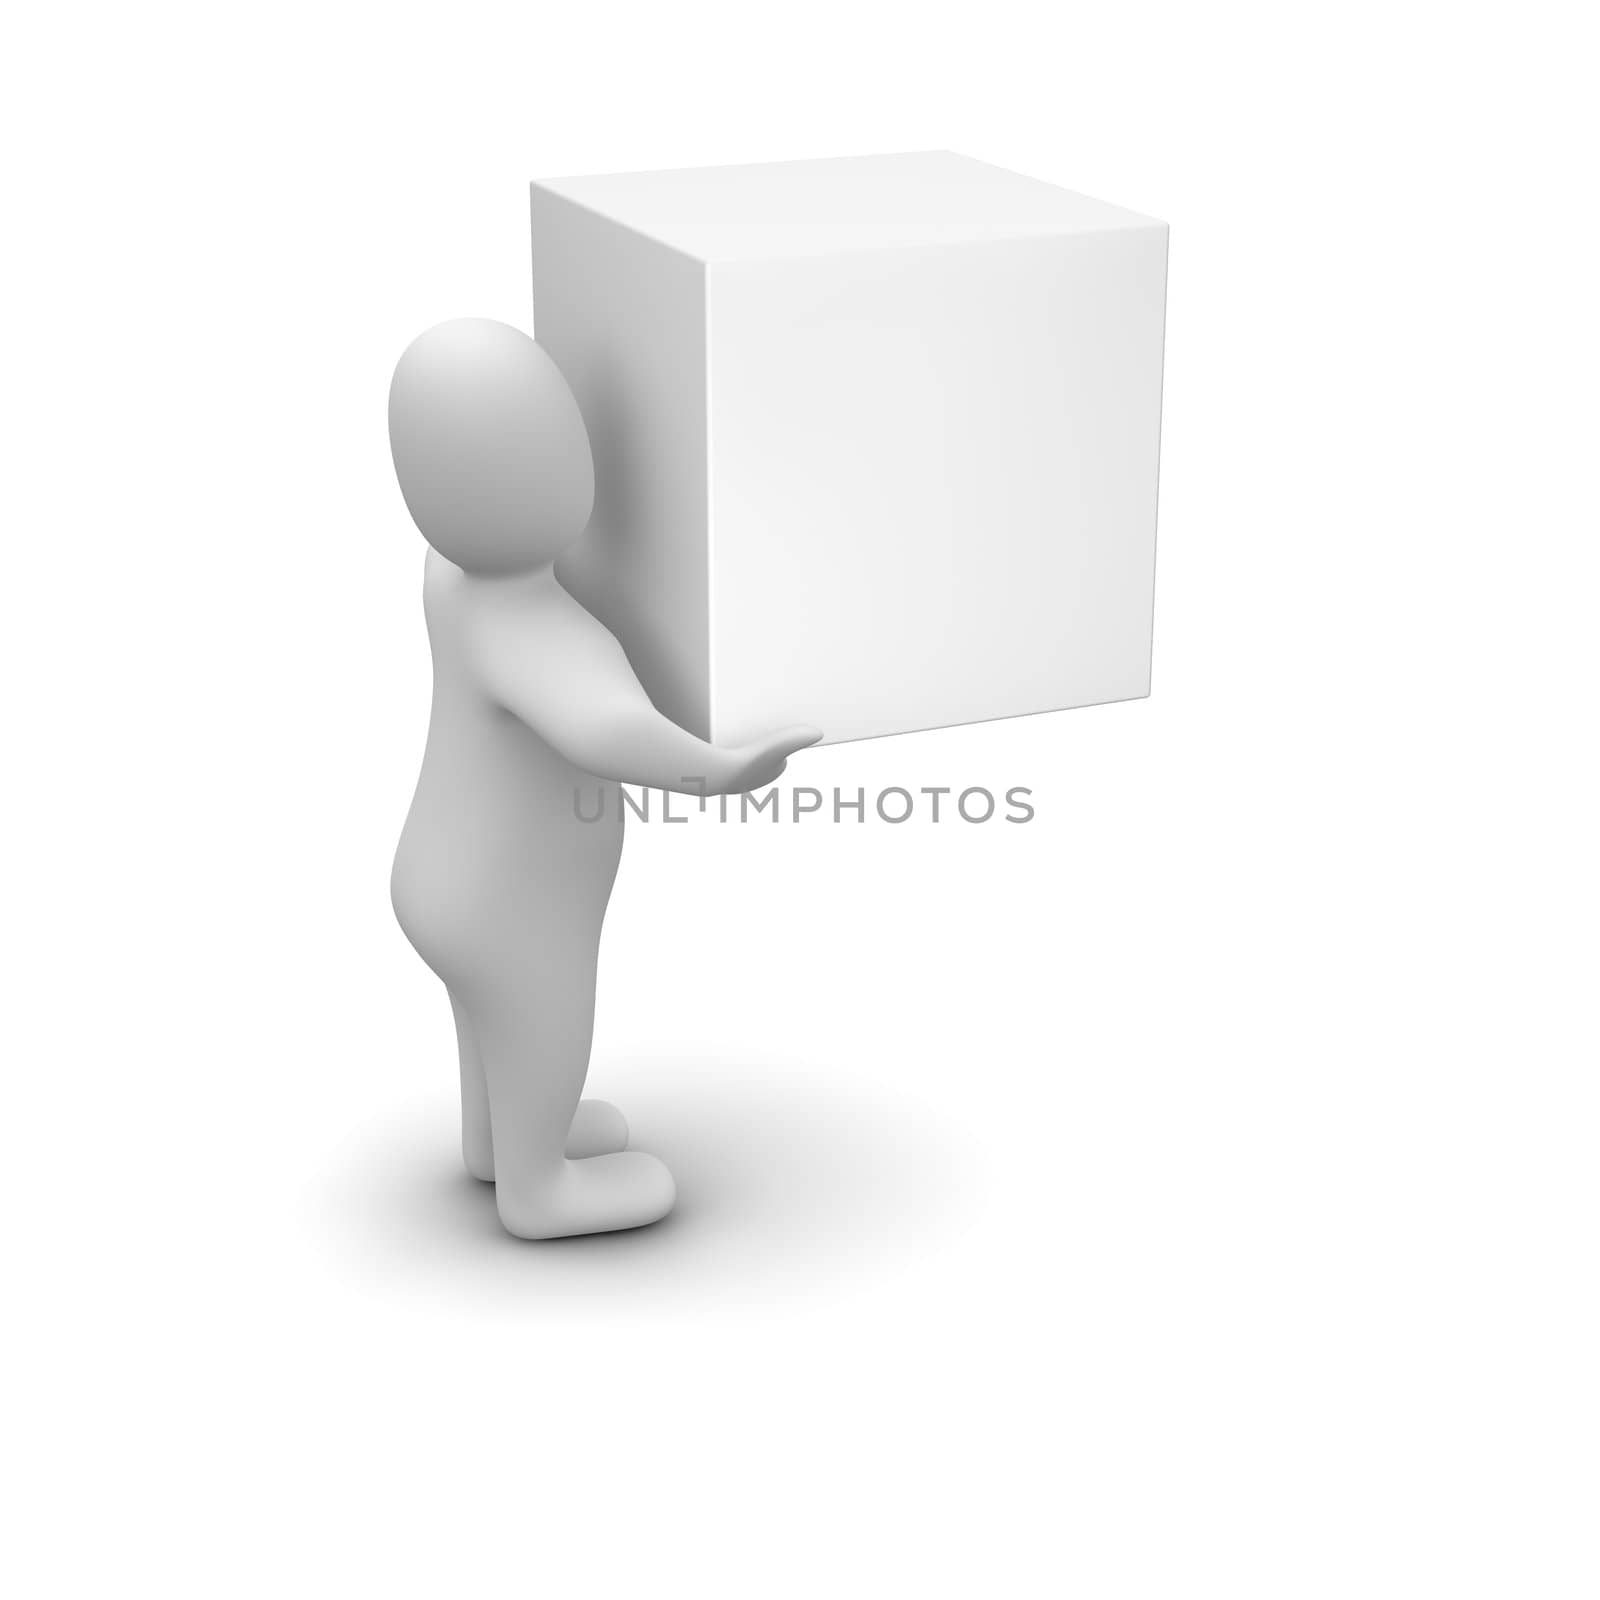 Man carrying blank box. 3d rendered illustration.